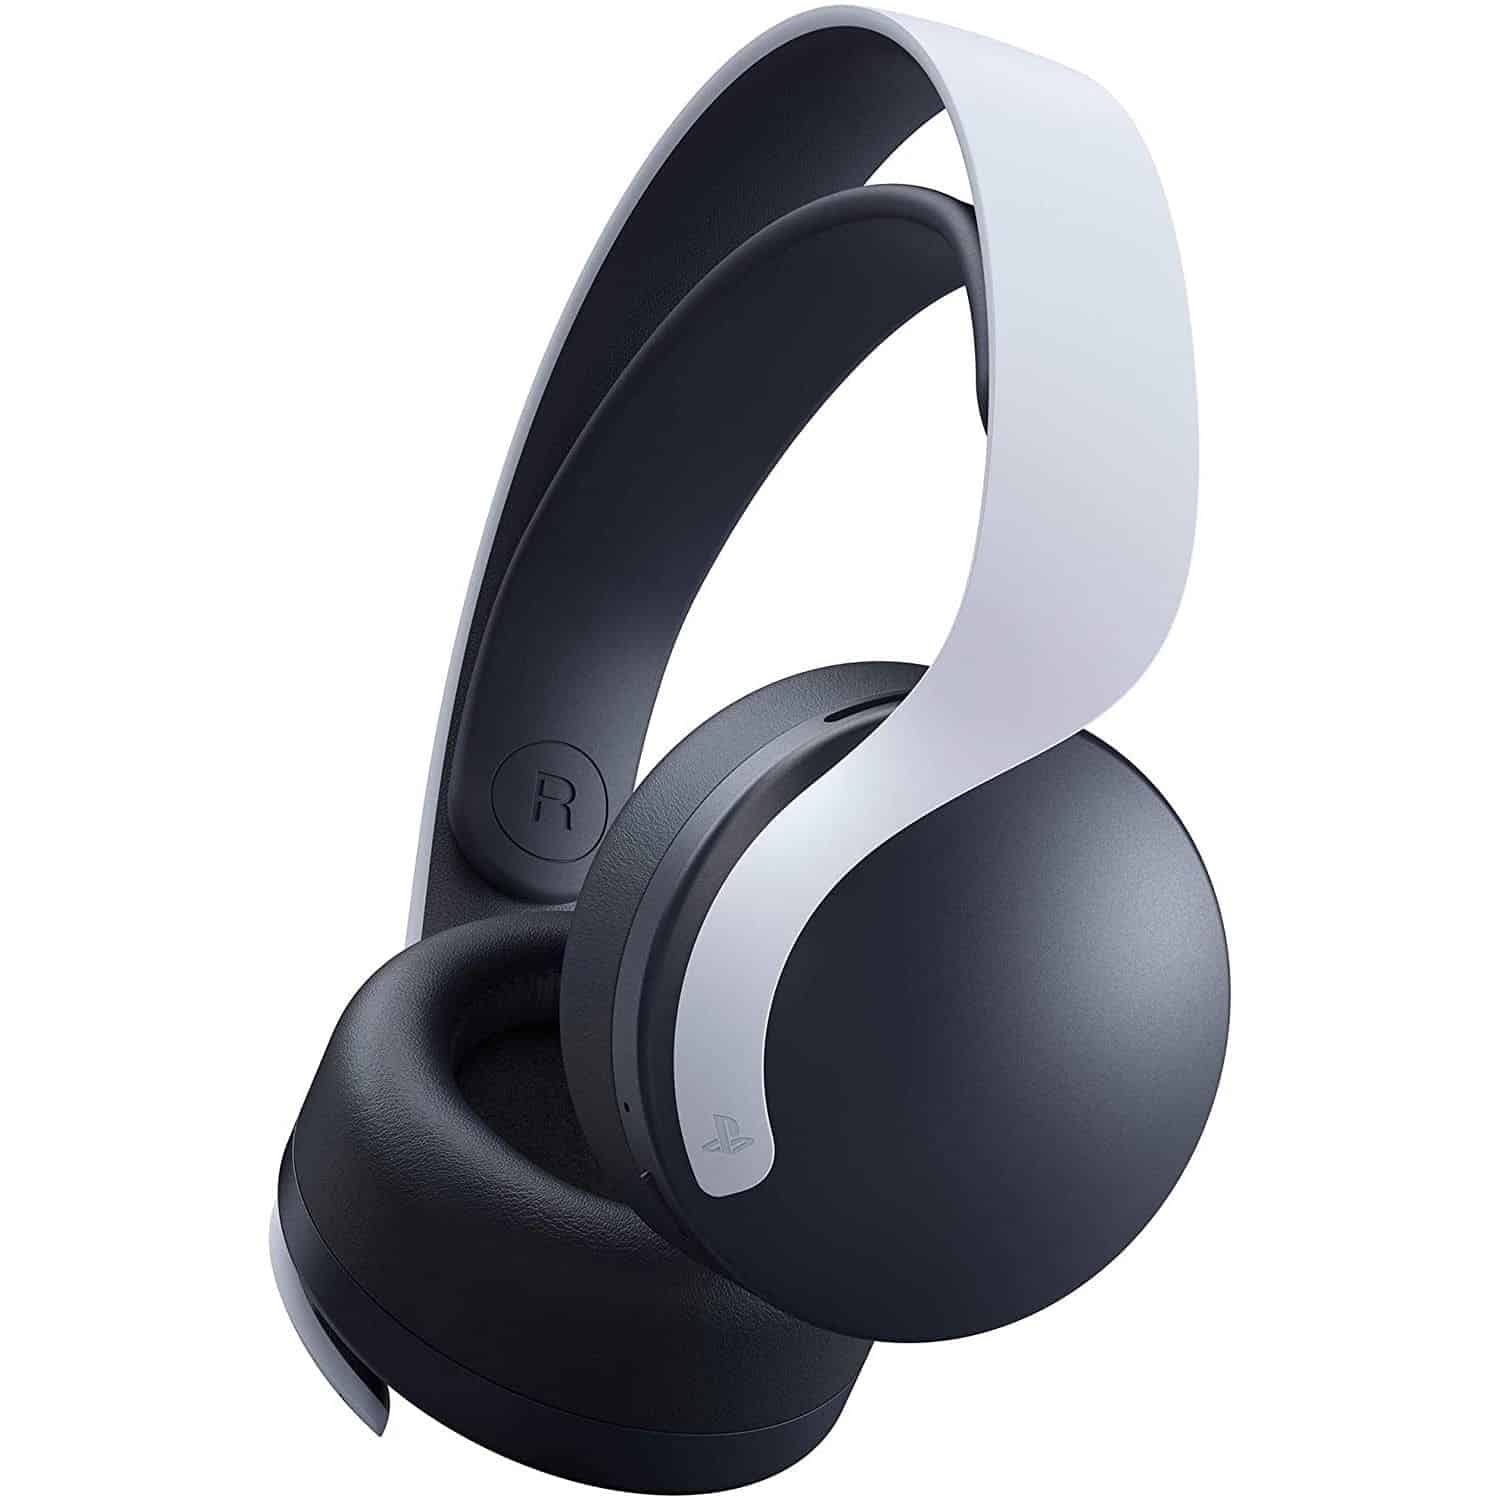 Sony Pulse 3D Wireless Headset Review: Spatial Sound for PS5